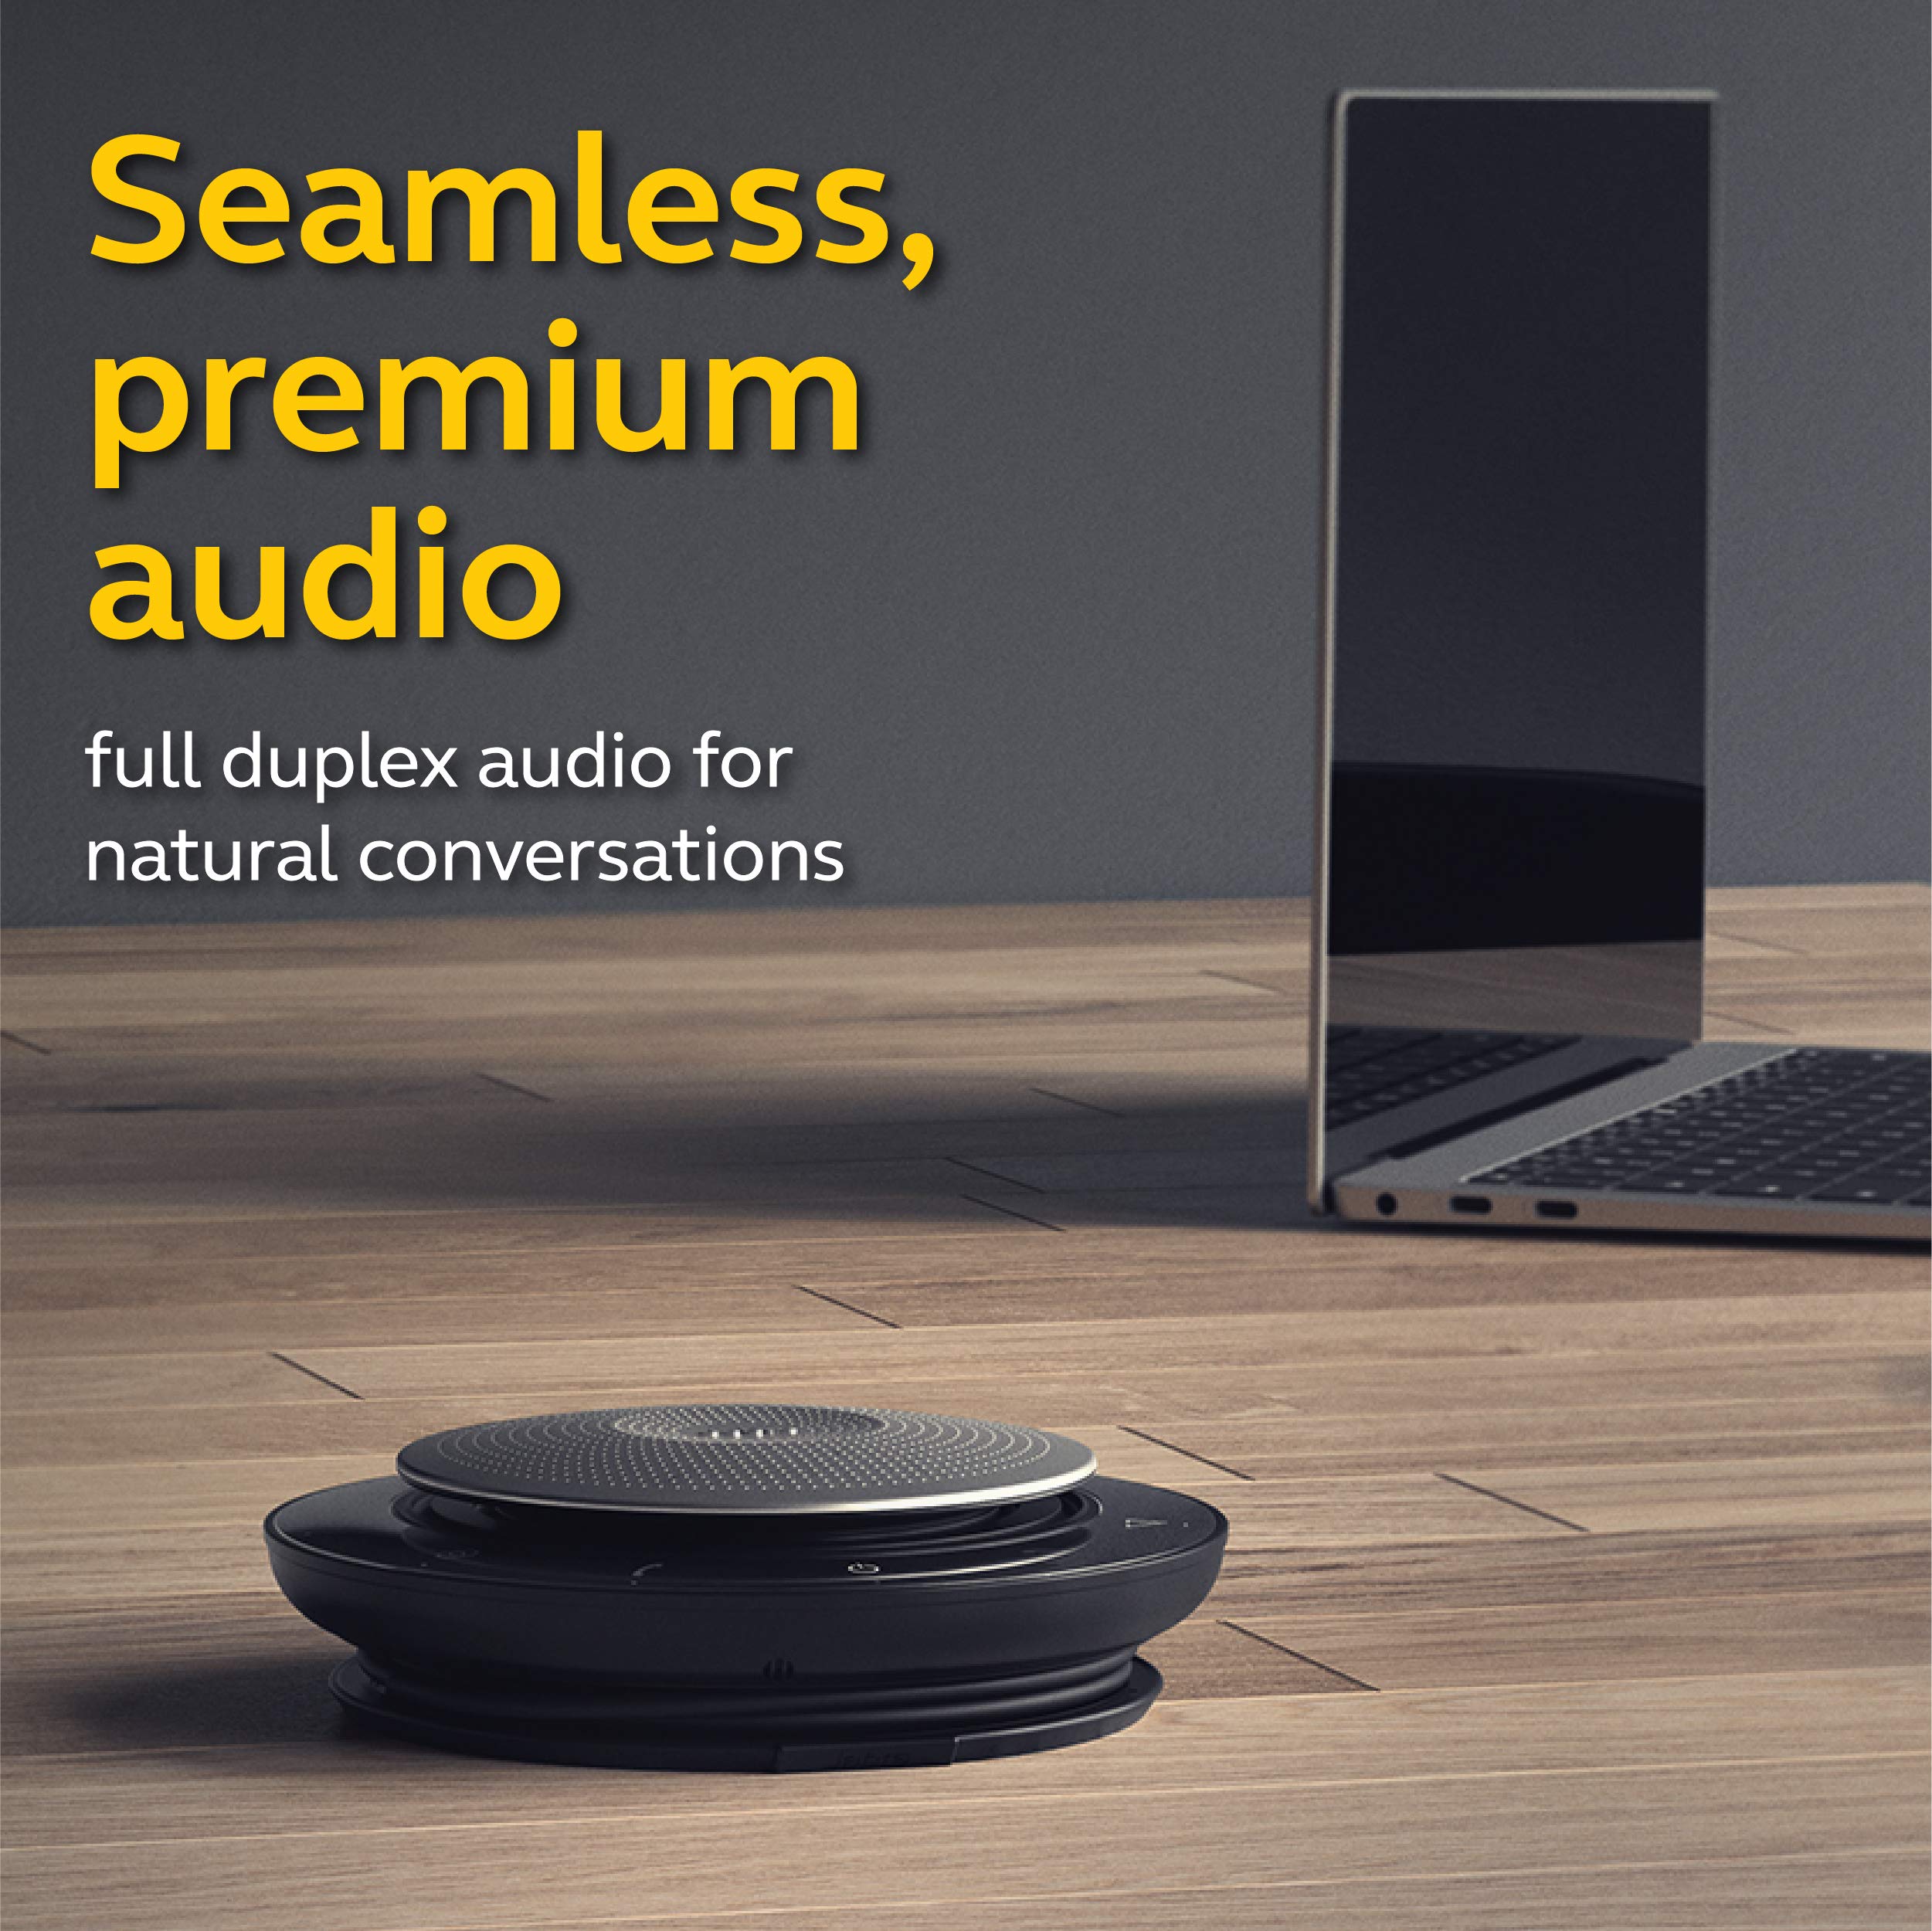 Jabra Speak 750 UC Wireless Bluetooth Speaker for Softphones and Mobile Phones – Easy To Set Up – Lightweight, Portable Conference Call Speaker with Premium Audio, Ideal for Remote Collaboration